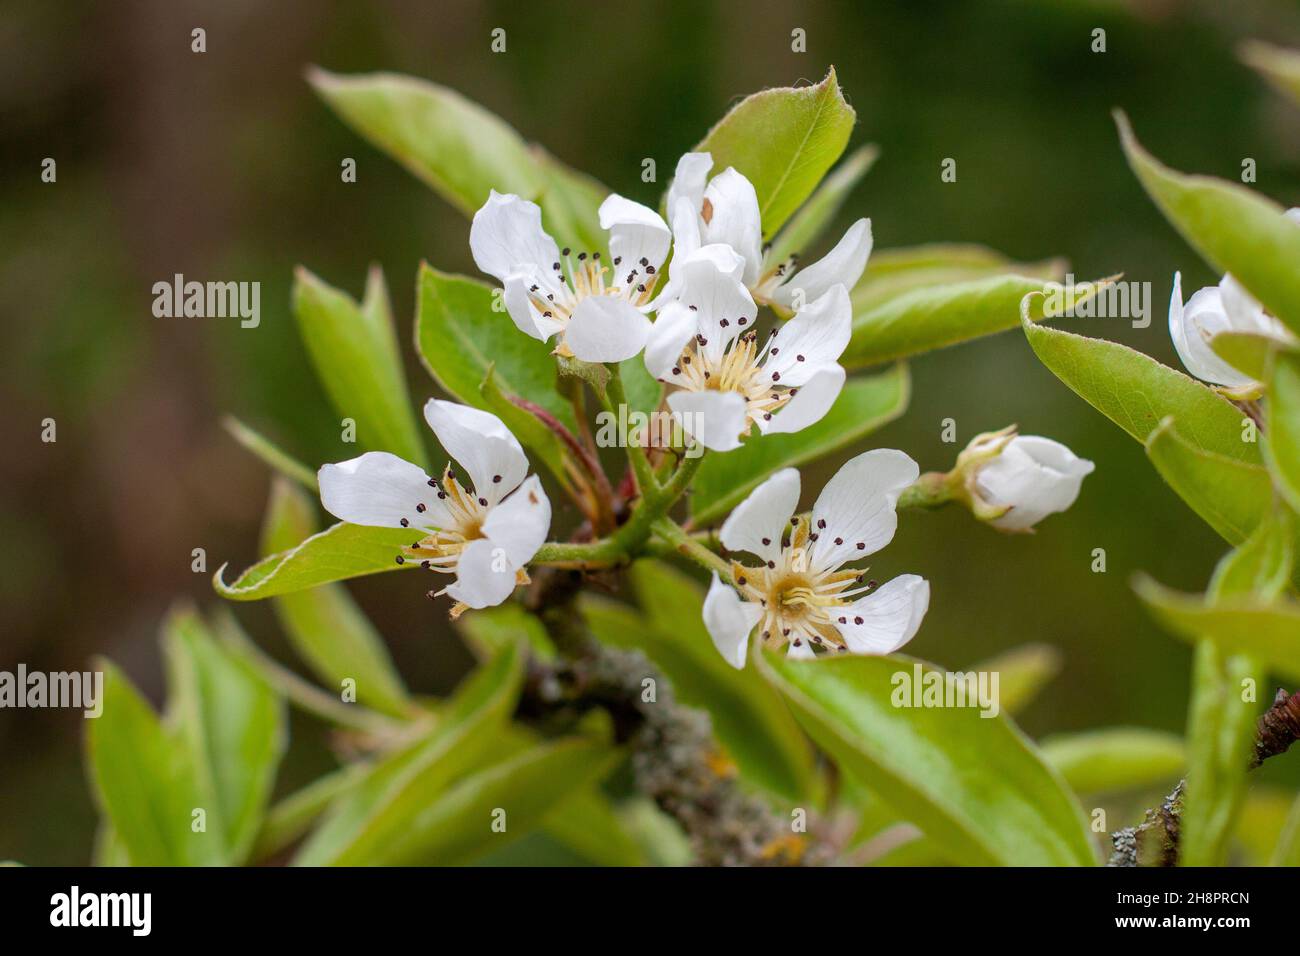 A small cluster of white Pyrus spinosa, Almond-leaved Pear flowers Stock Photo